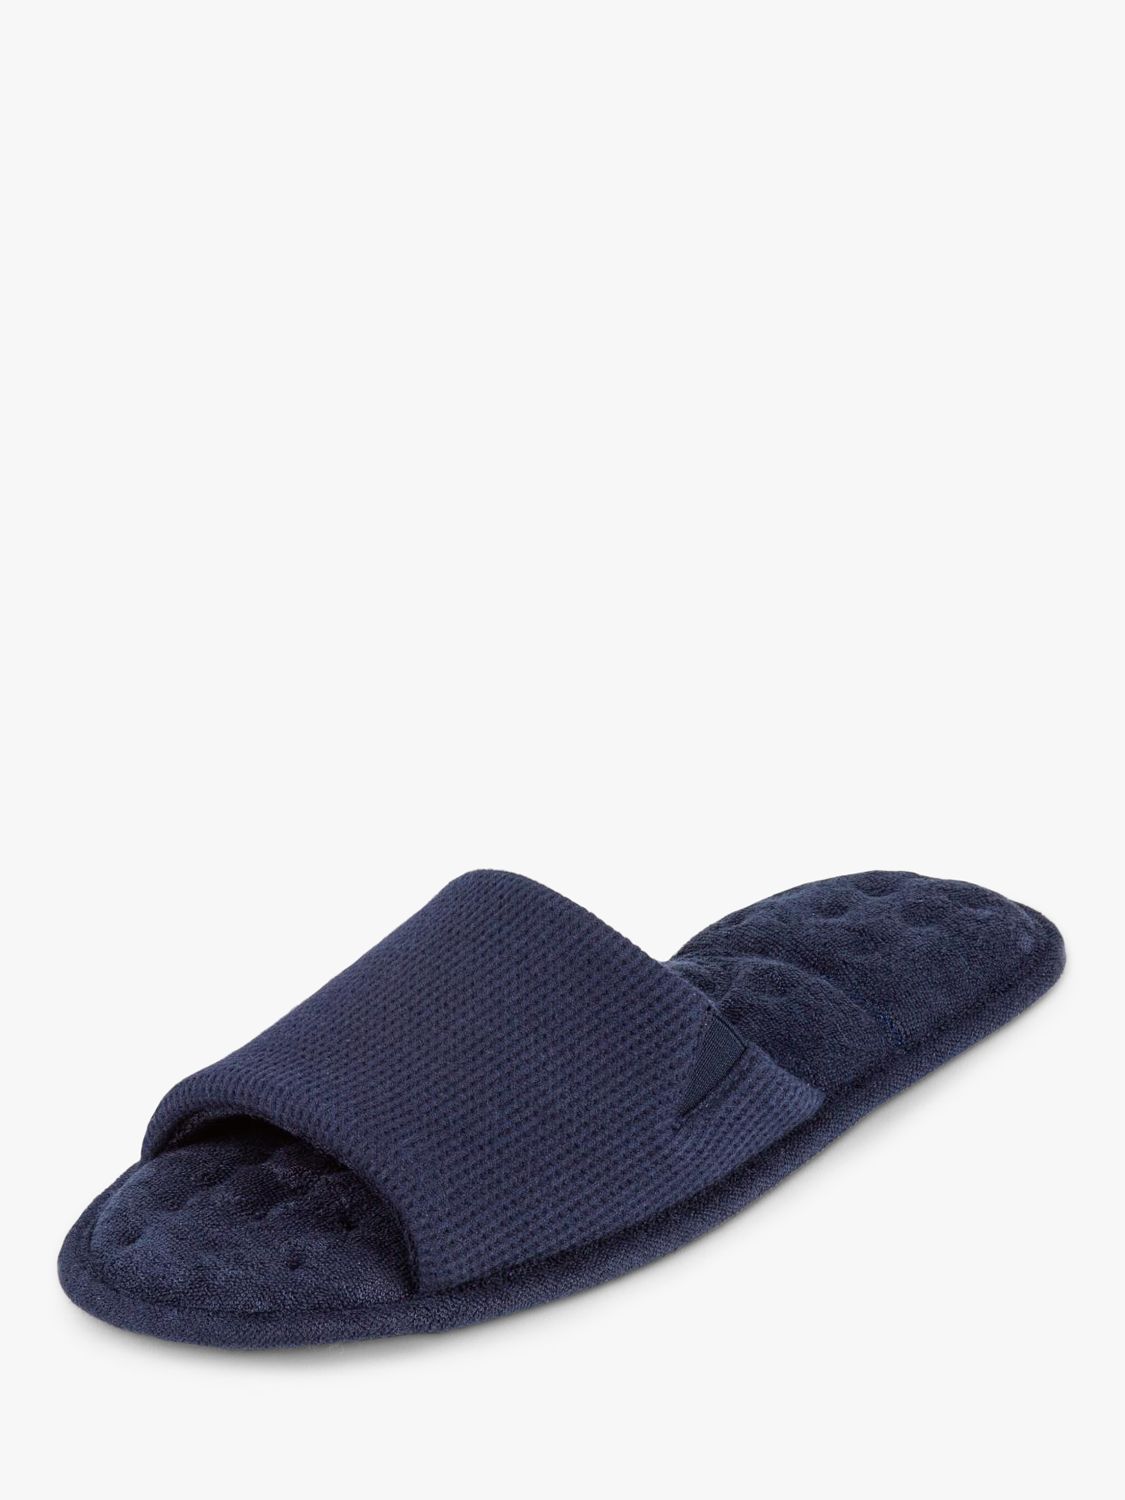 totes Waffle Open Toe Slippers, Navy, 8